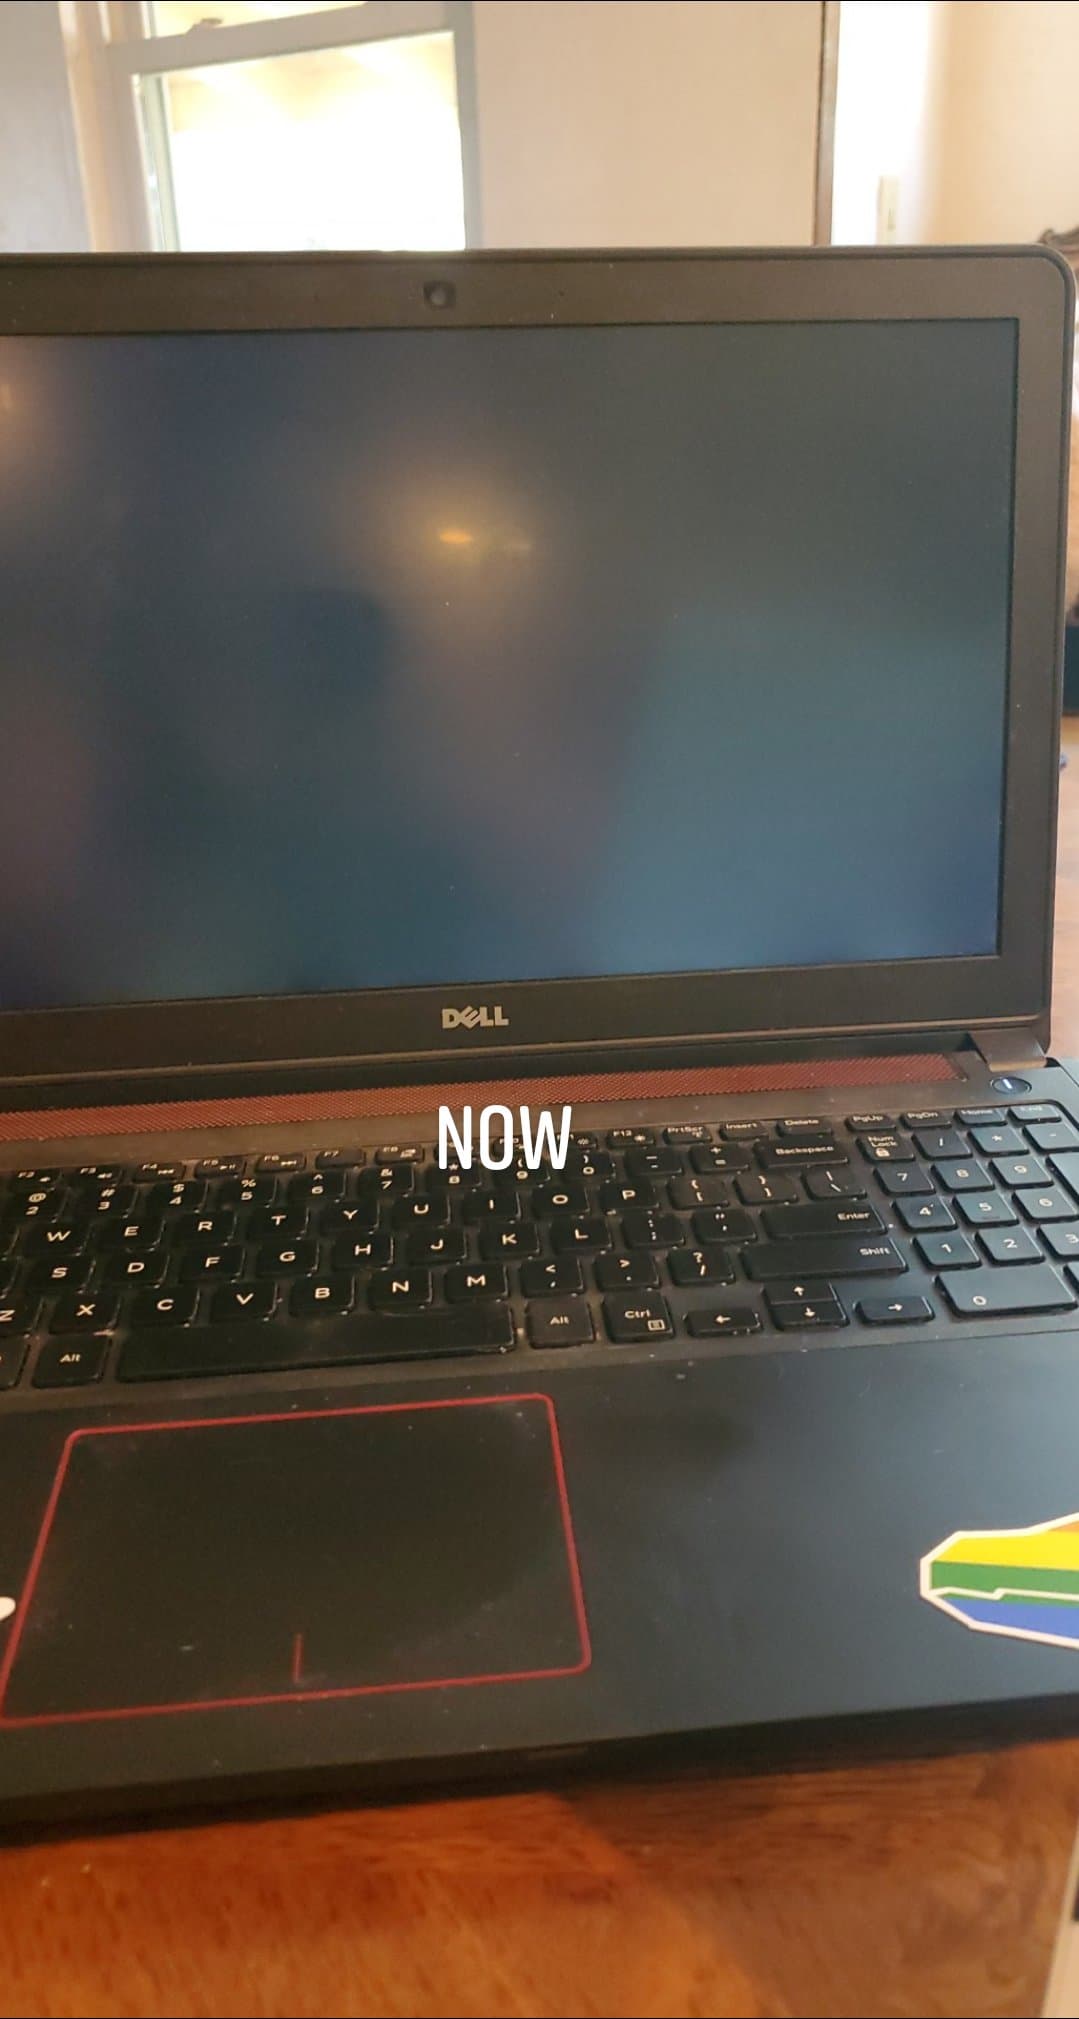 I've installed Windows 11 on a Dell Inspiron 7559, already